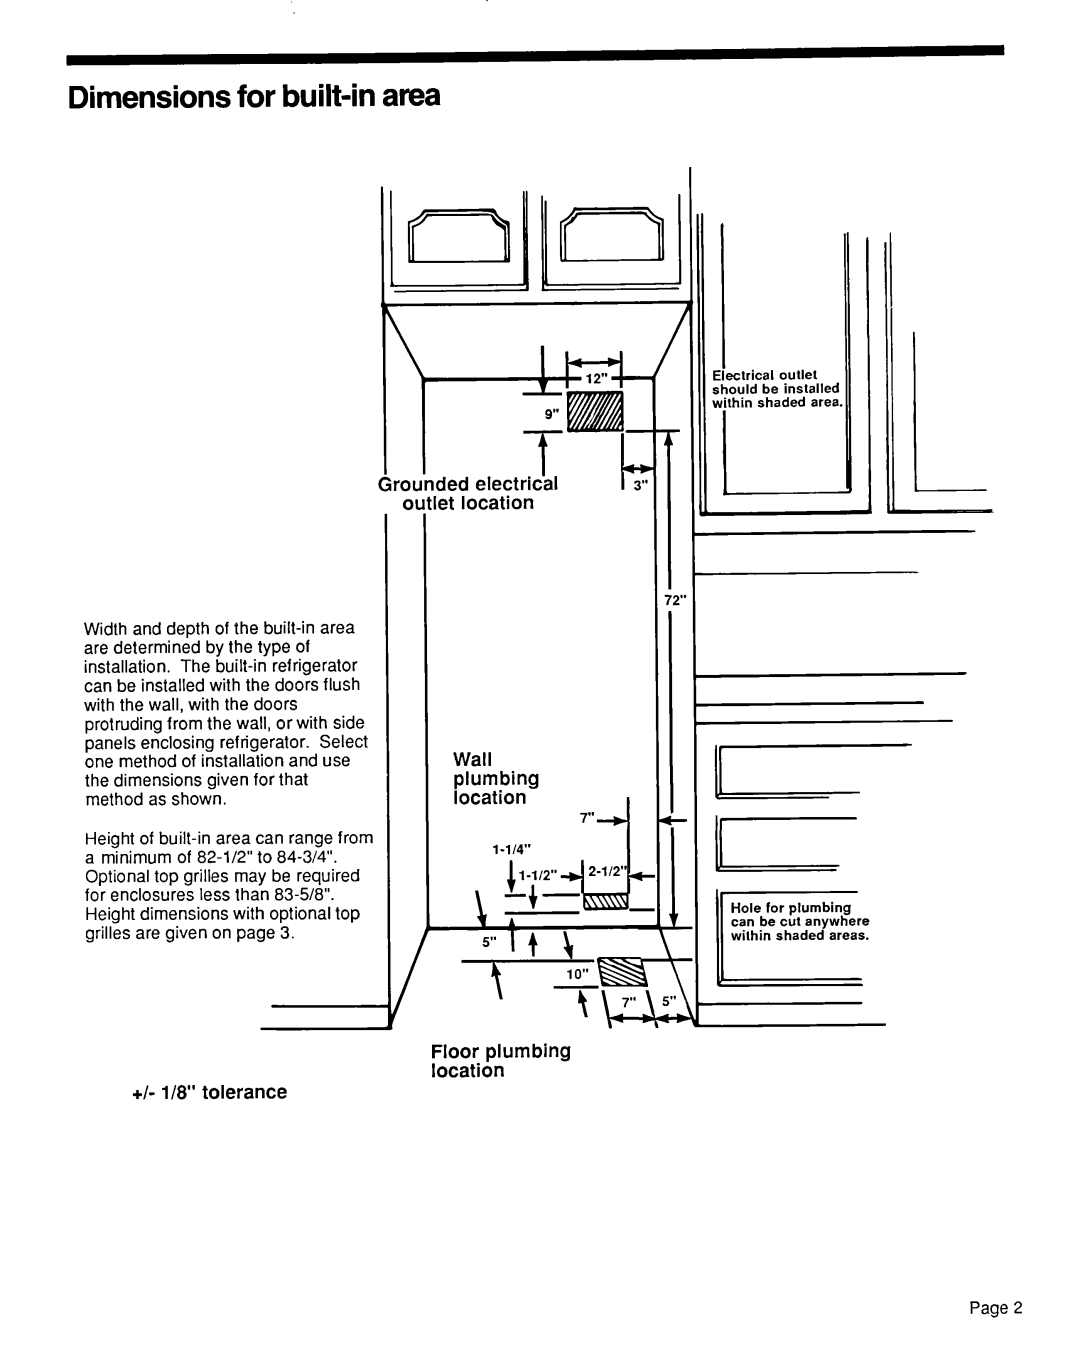 KitchenAid KSRF36DT manual Dimensions for built-in area, Wall, +/- 118” tolerance, Gr‘ouhded electrich +tllet location 